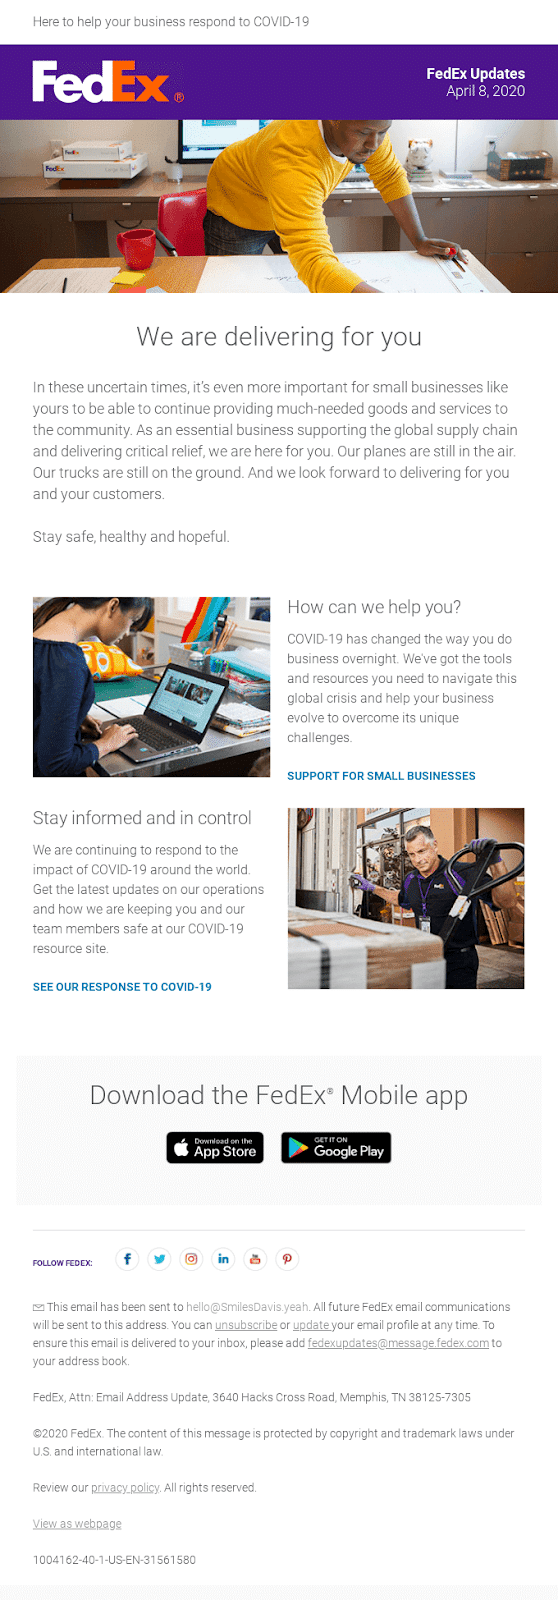 fedex-email-connects-with-customers